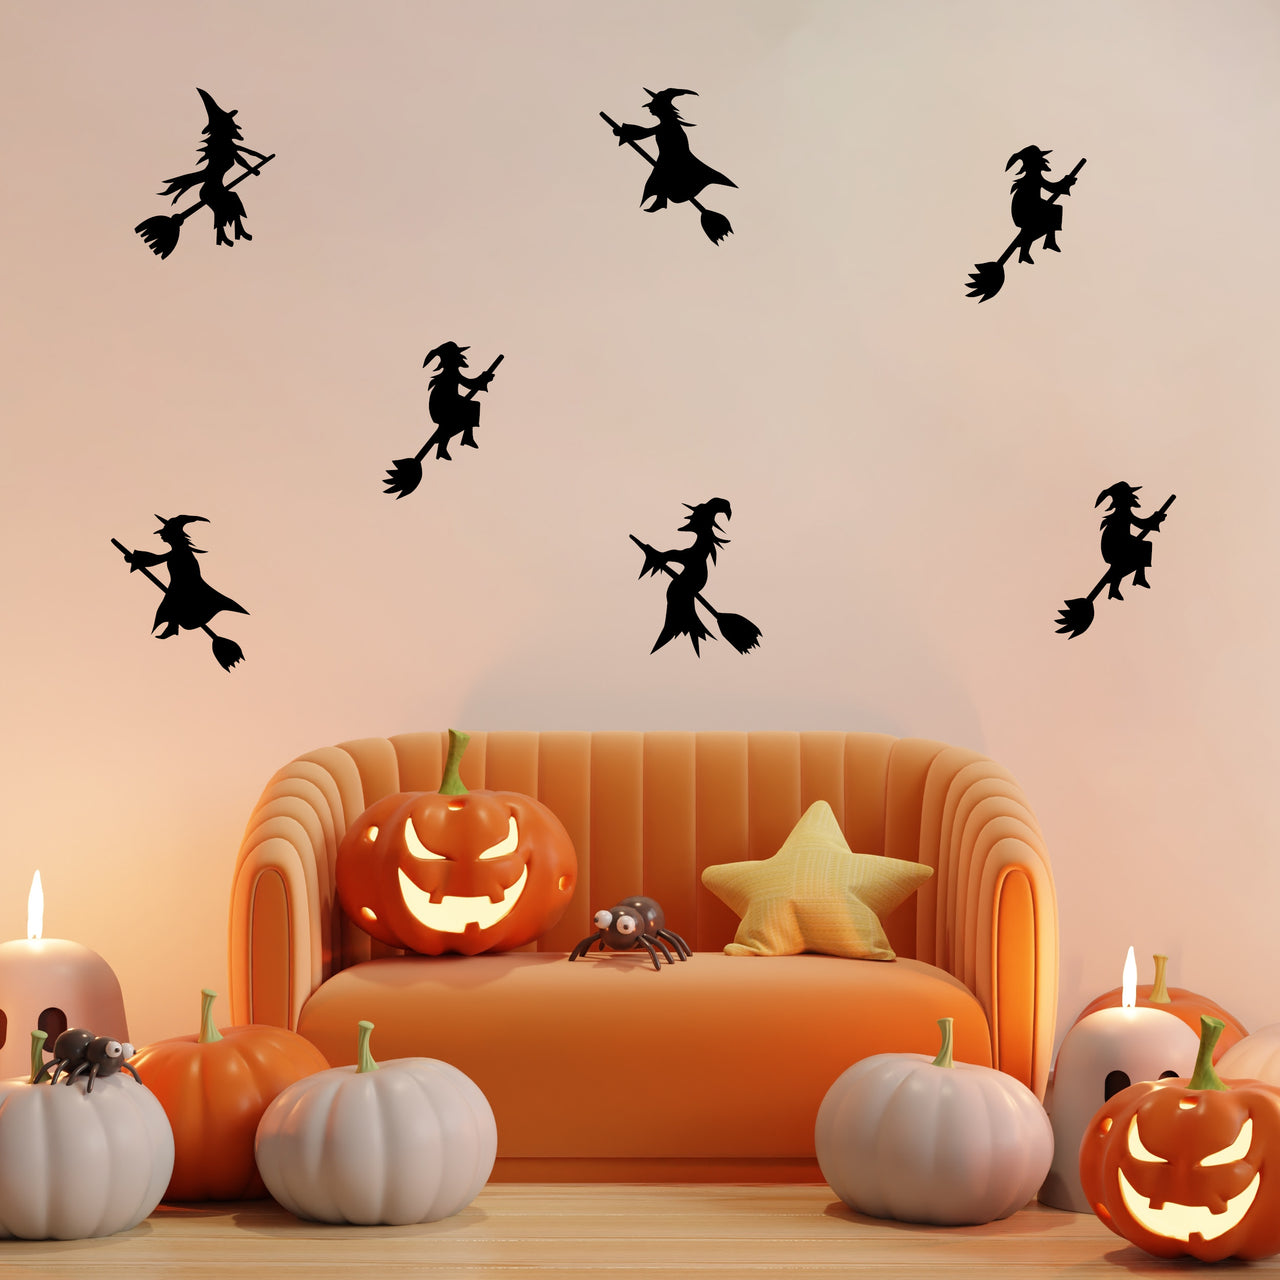 Black Witches Wall Decals